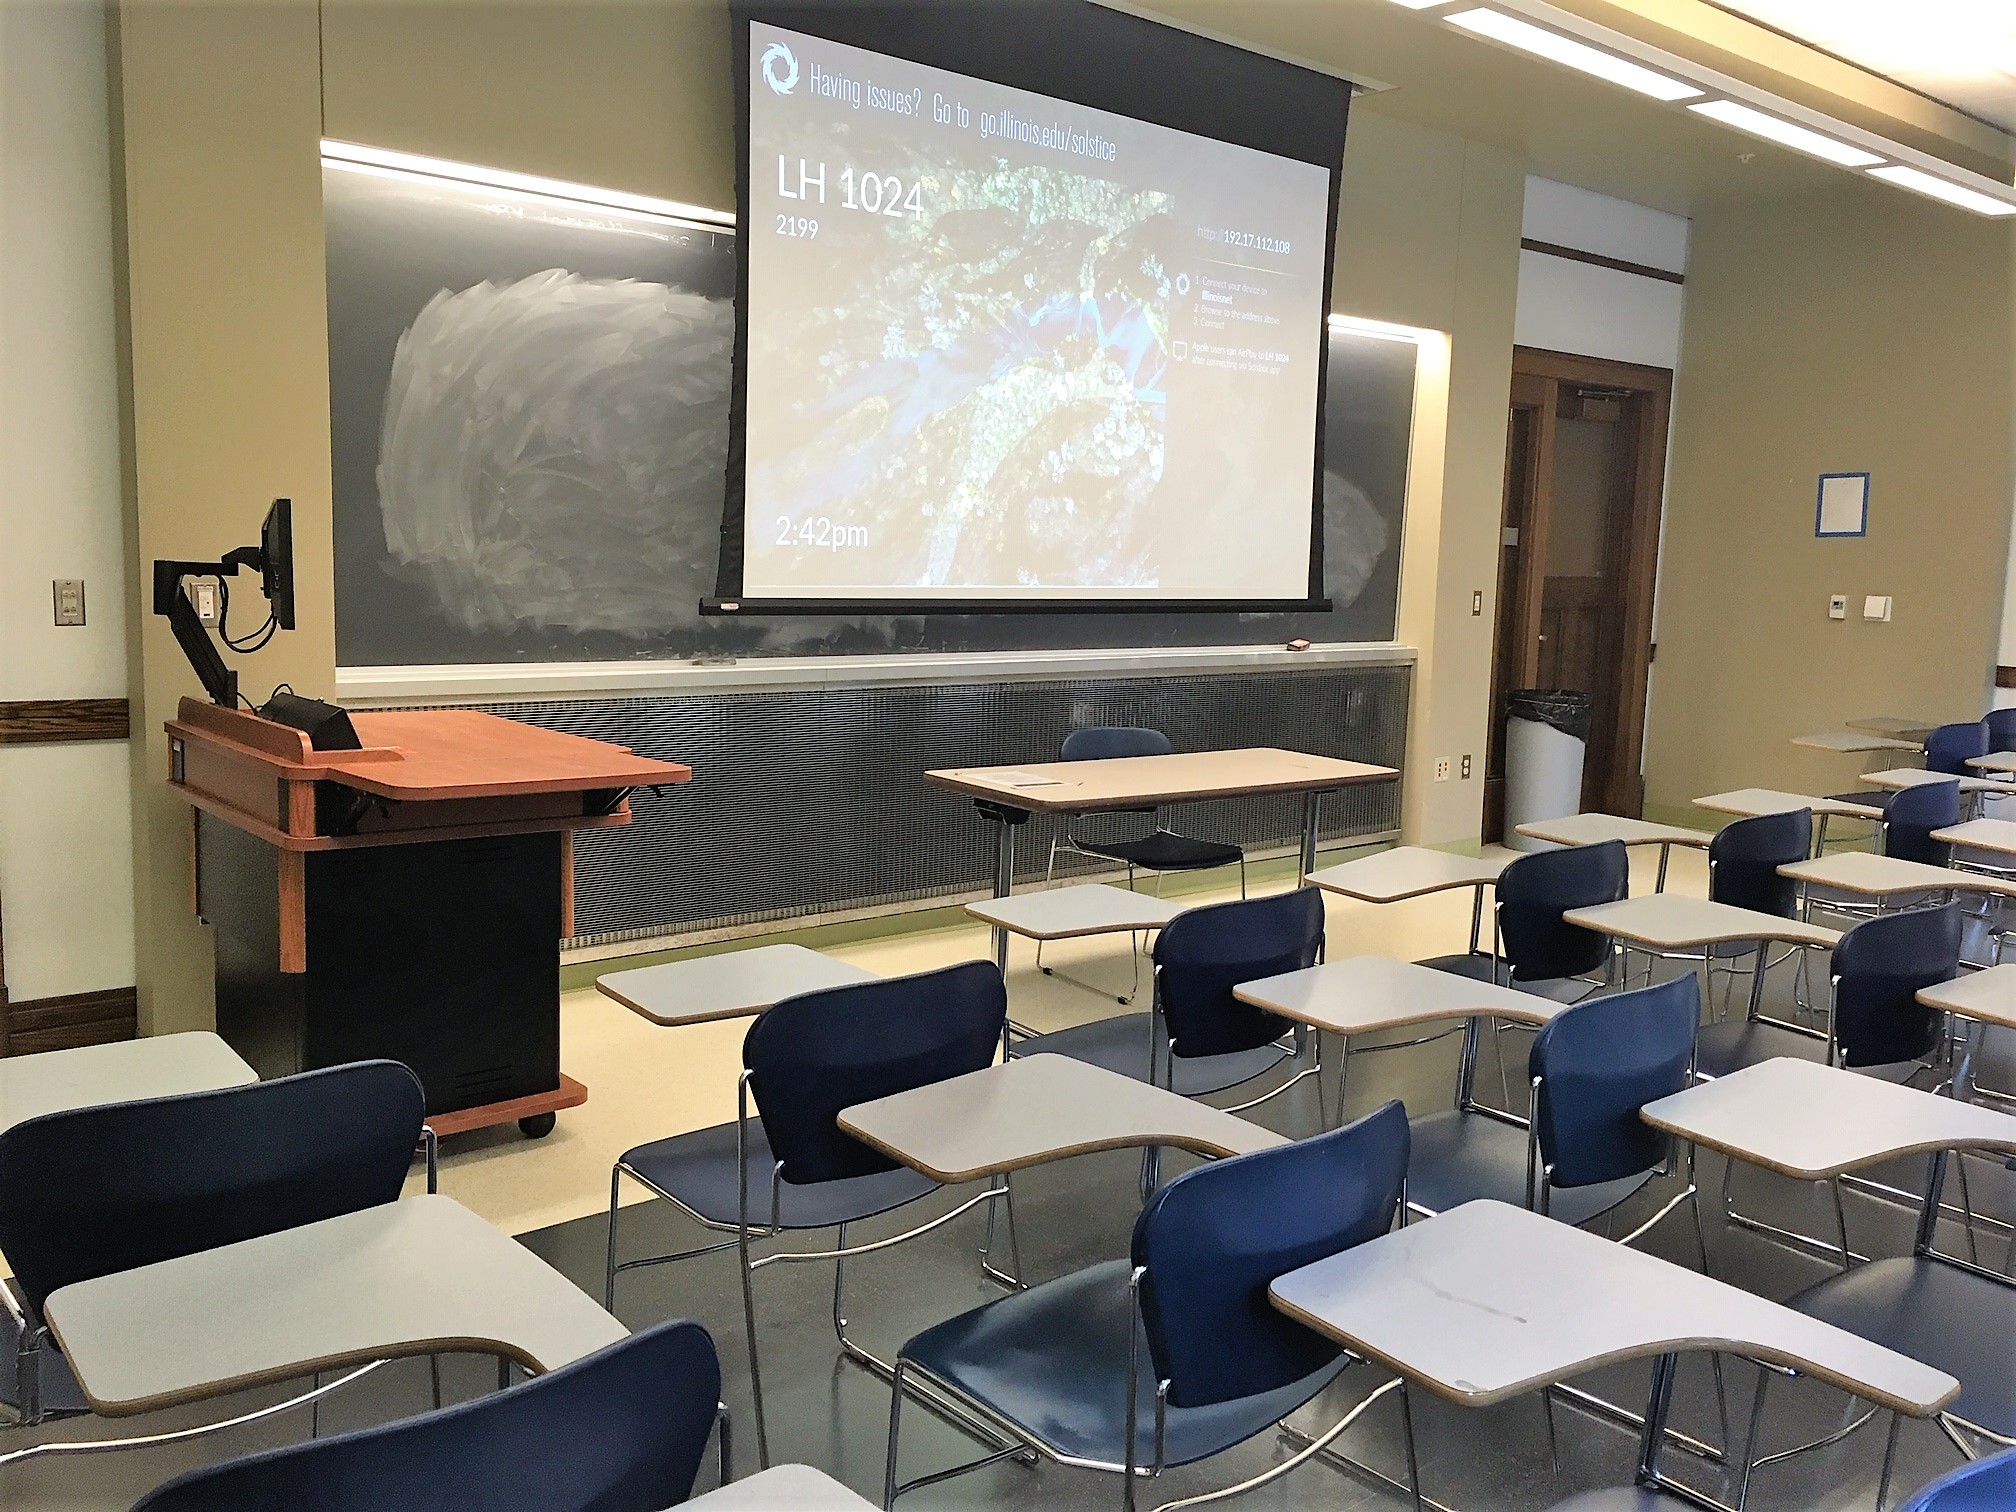 A view of the classroom with moveable tablet arm chairs, chalkboard, and instructor table in front.